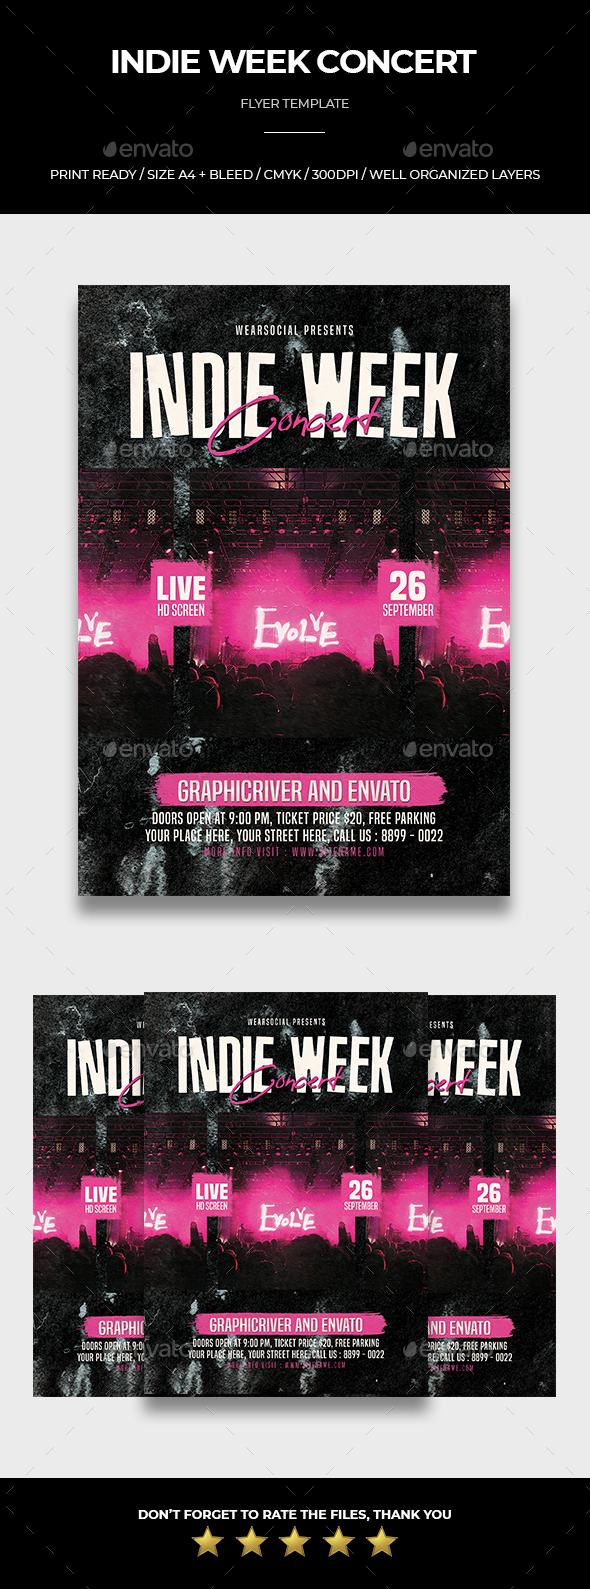 Indie Week Concert Flyer by Wearsocial GraphicRiver